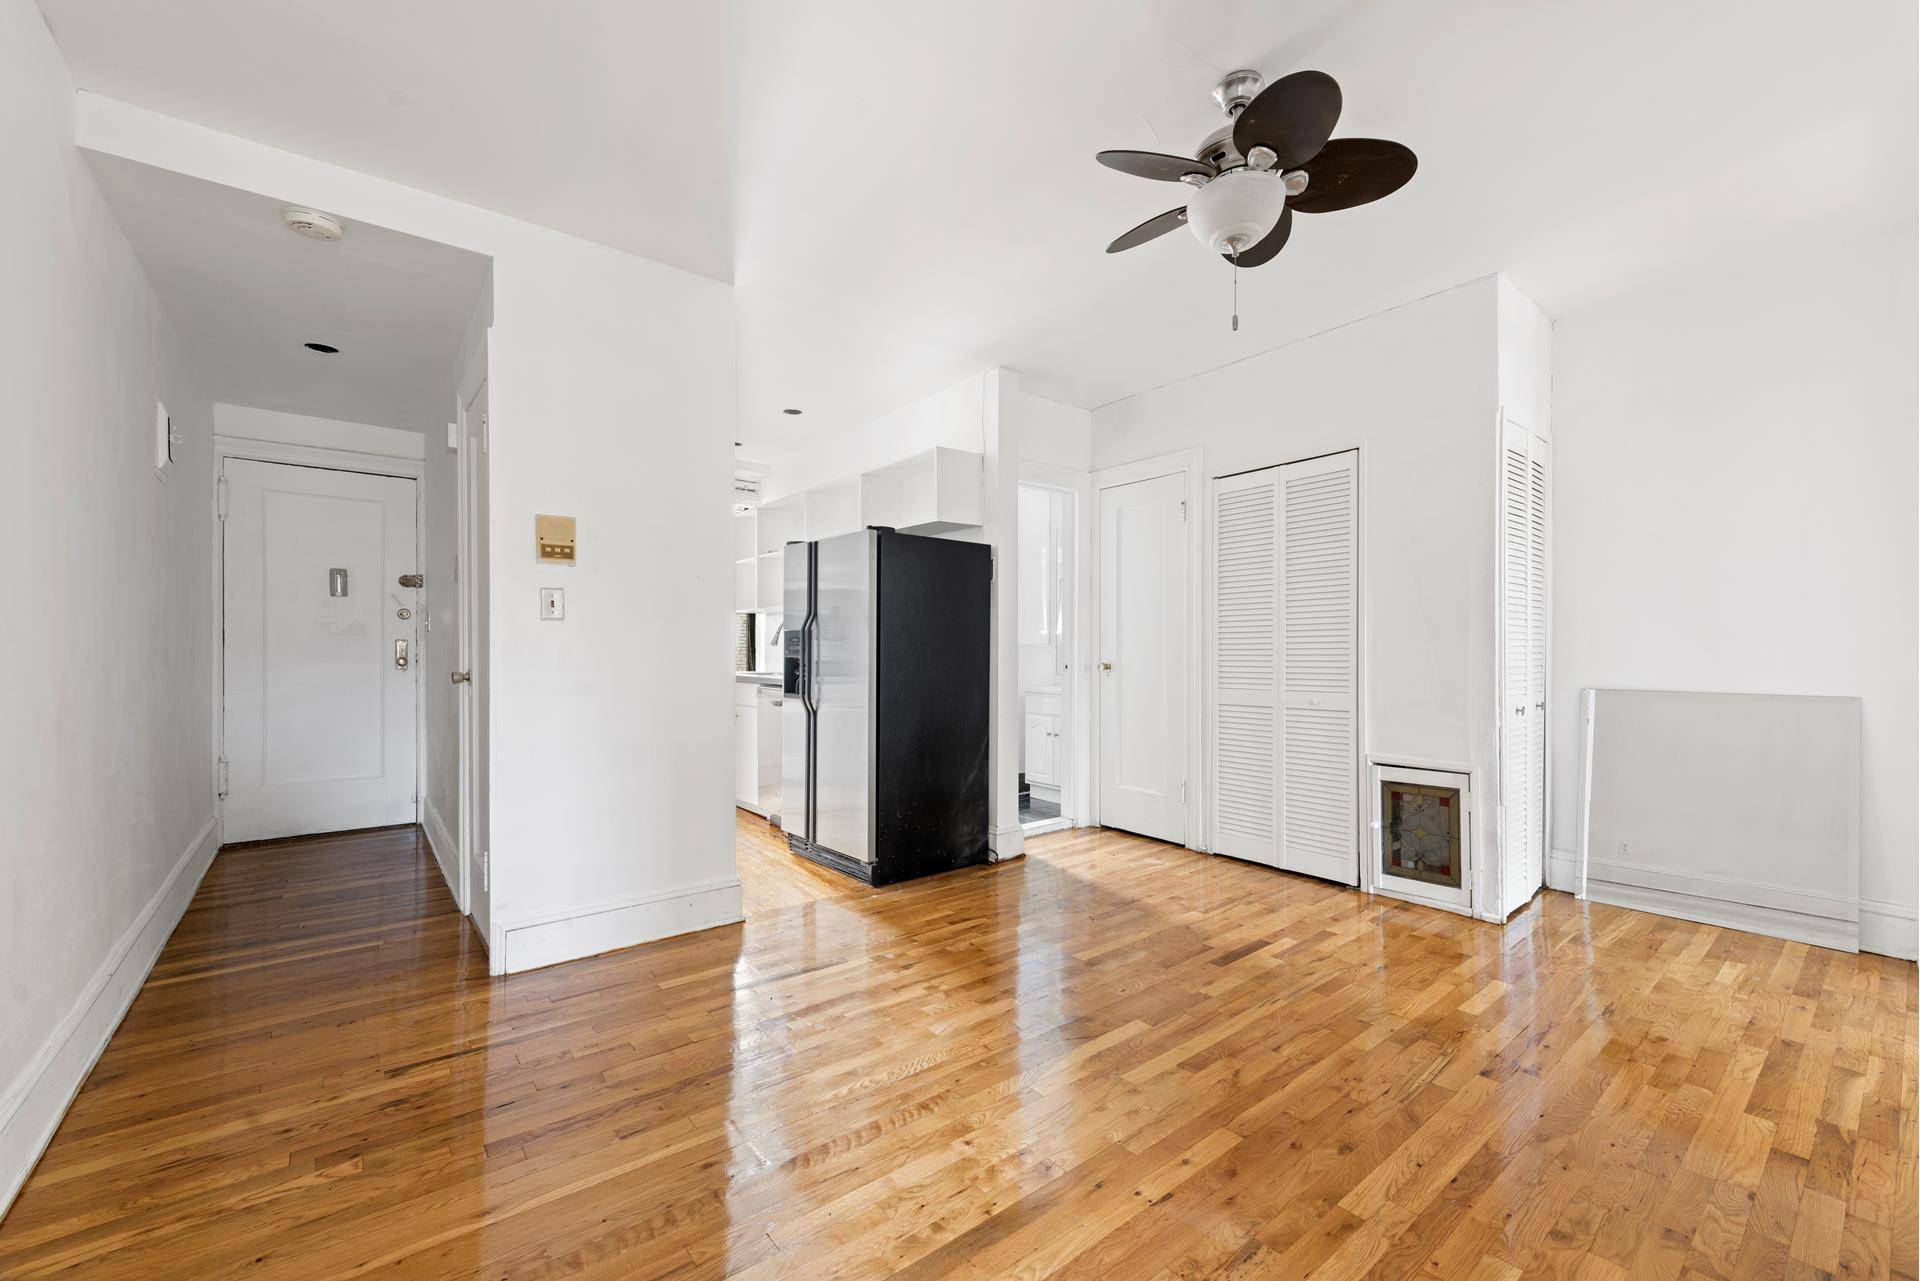 A gem in Kensington ! This is one of the most coveted coop buildings in the Kensington Windsor Terrace area of Brooklyn.